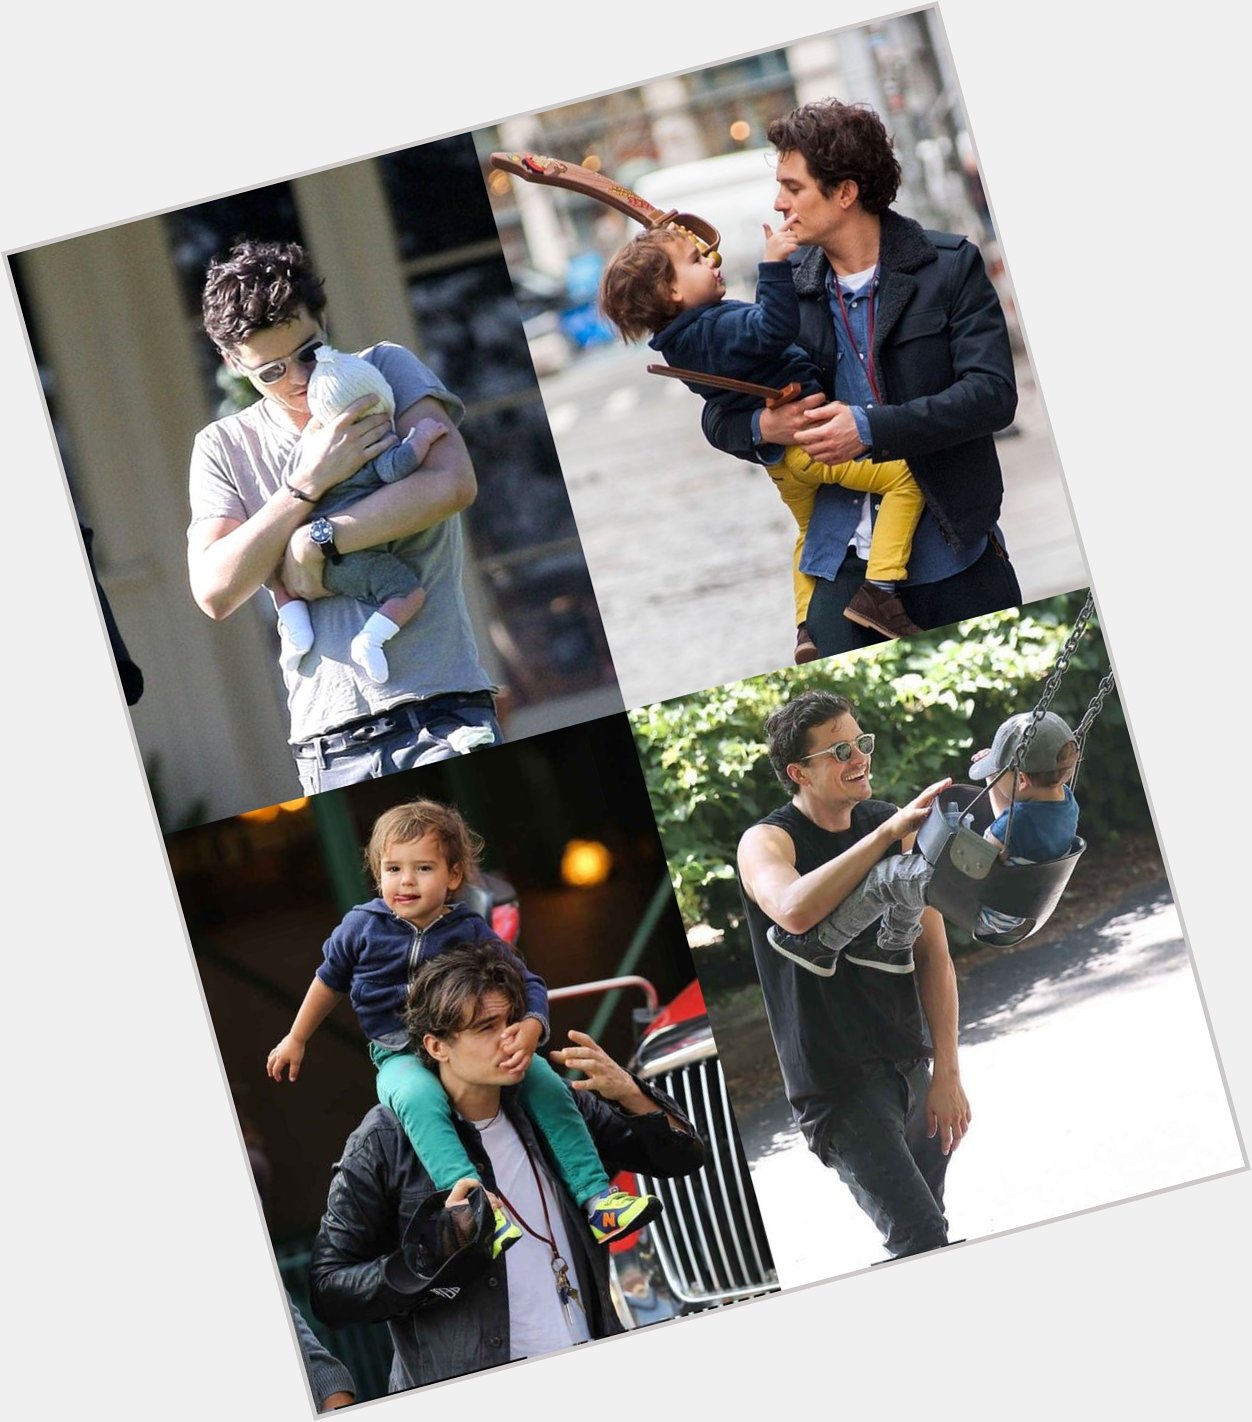 Happy birthday to flynn bloom, forever the precious baby of orlando bloom <3 